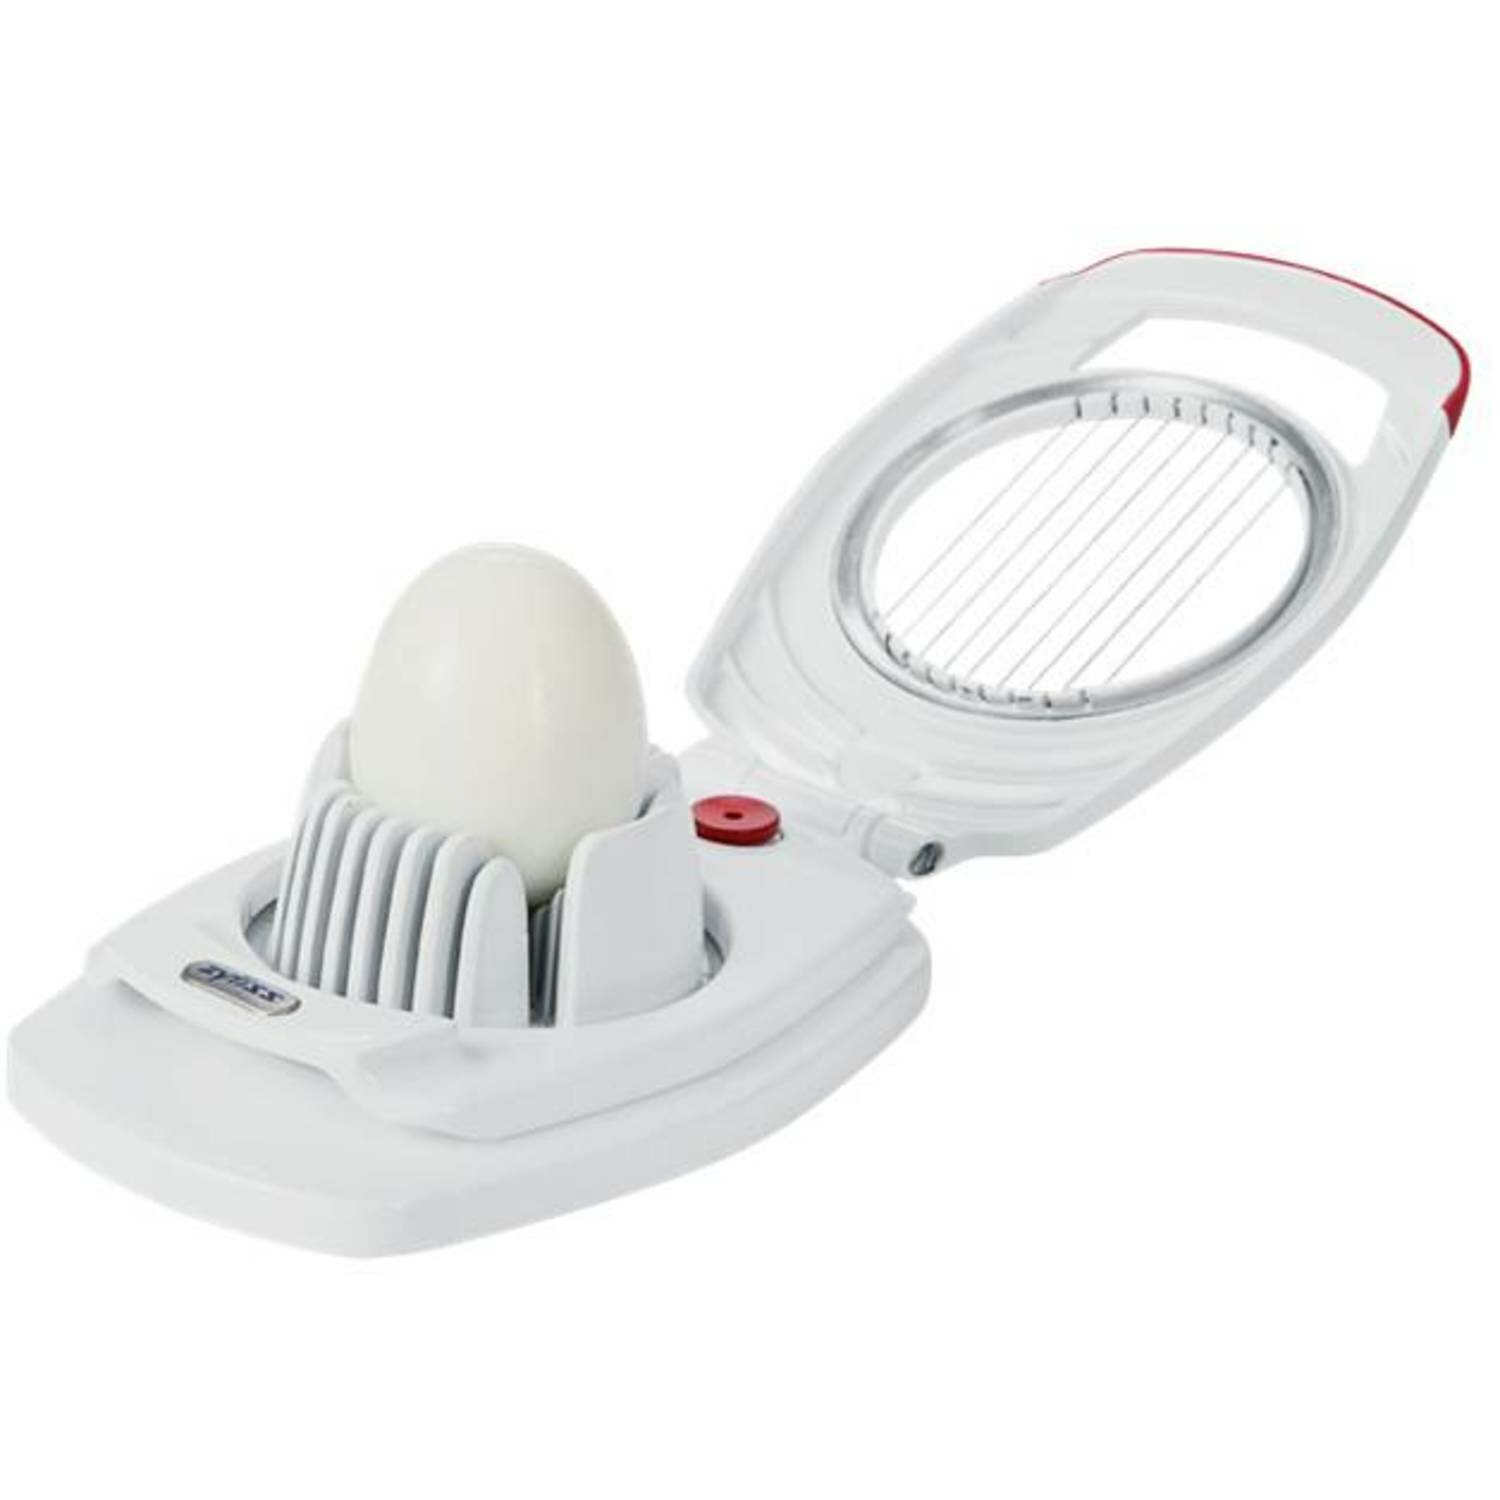 Zyliss Miniature Masher and Scoop